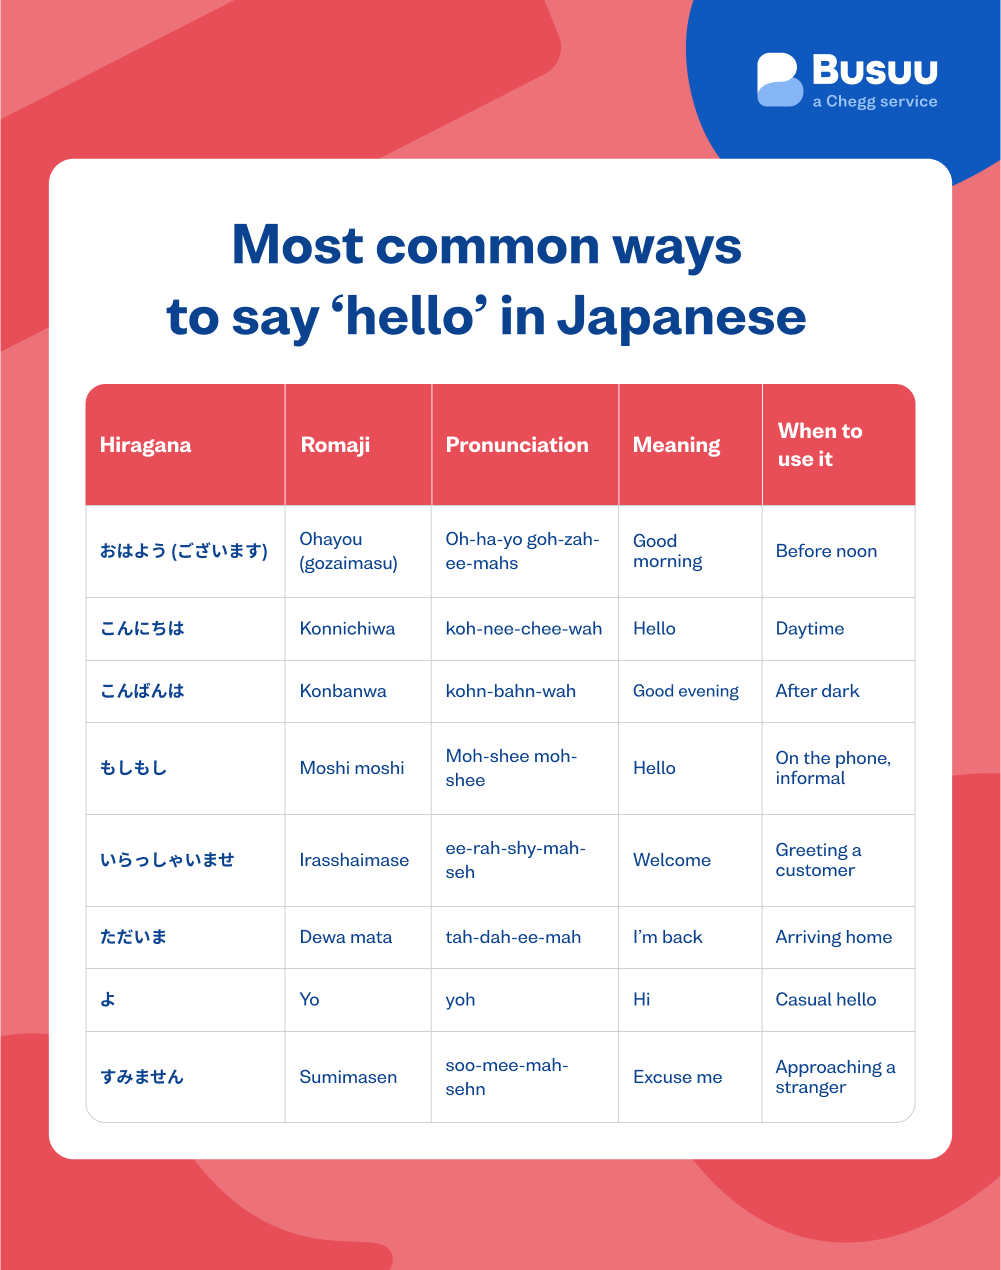 Telling Time in Japanese - Everything You Need to Know